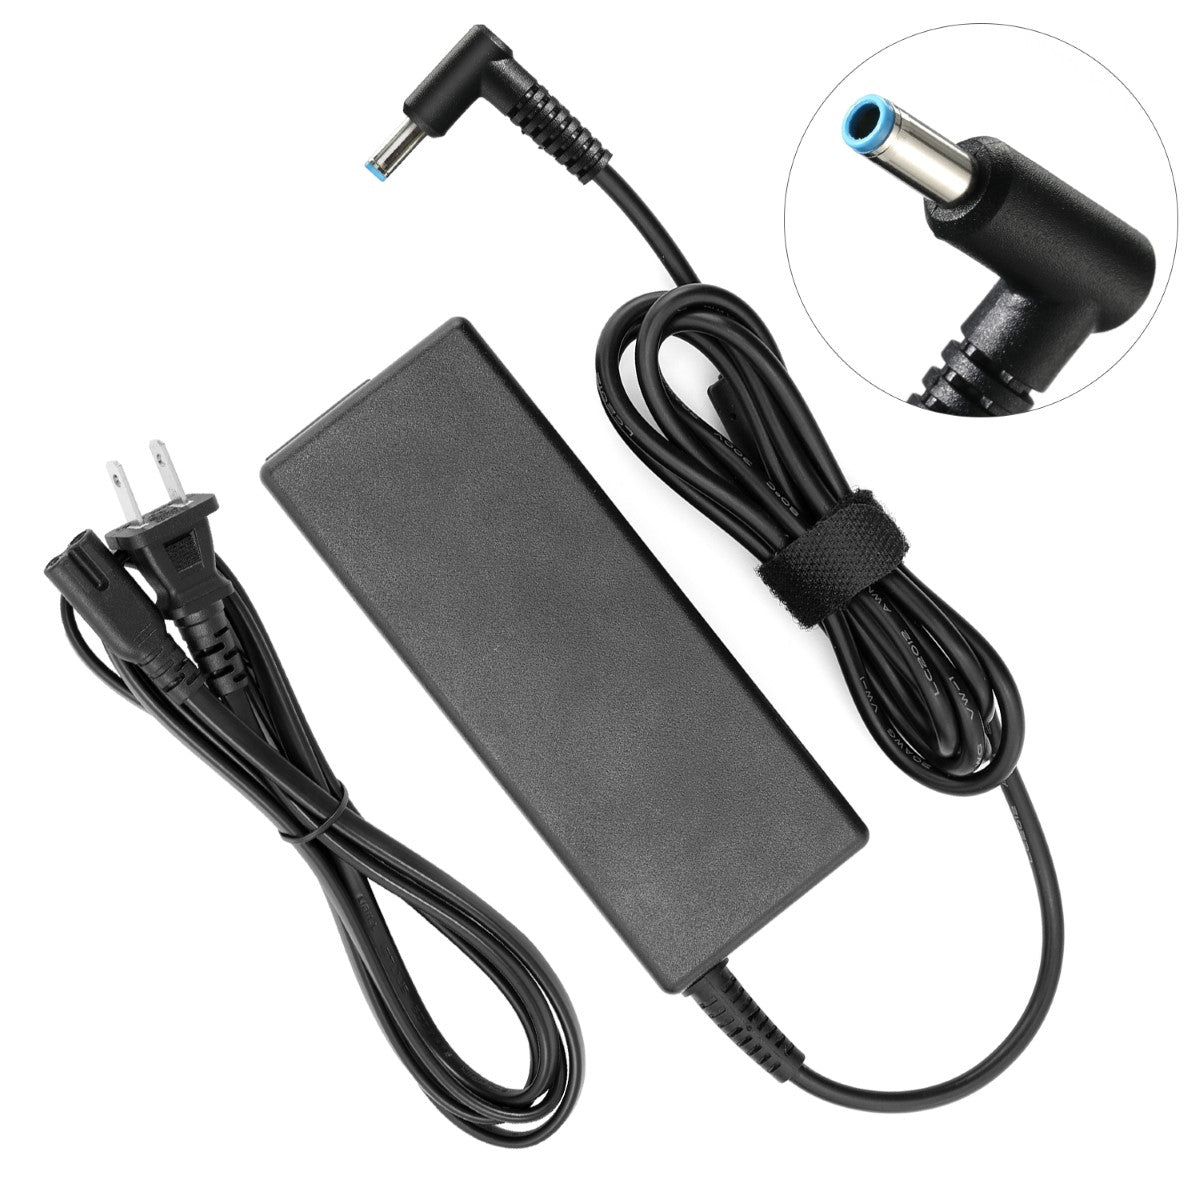 AC Adapter Charger for HP Envy TouchSmart m6-k015dx Notebook.